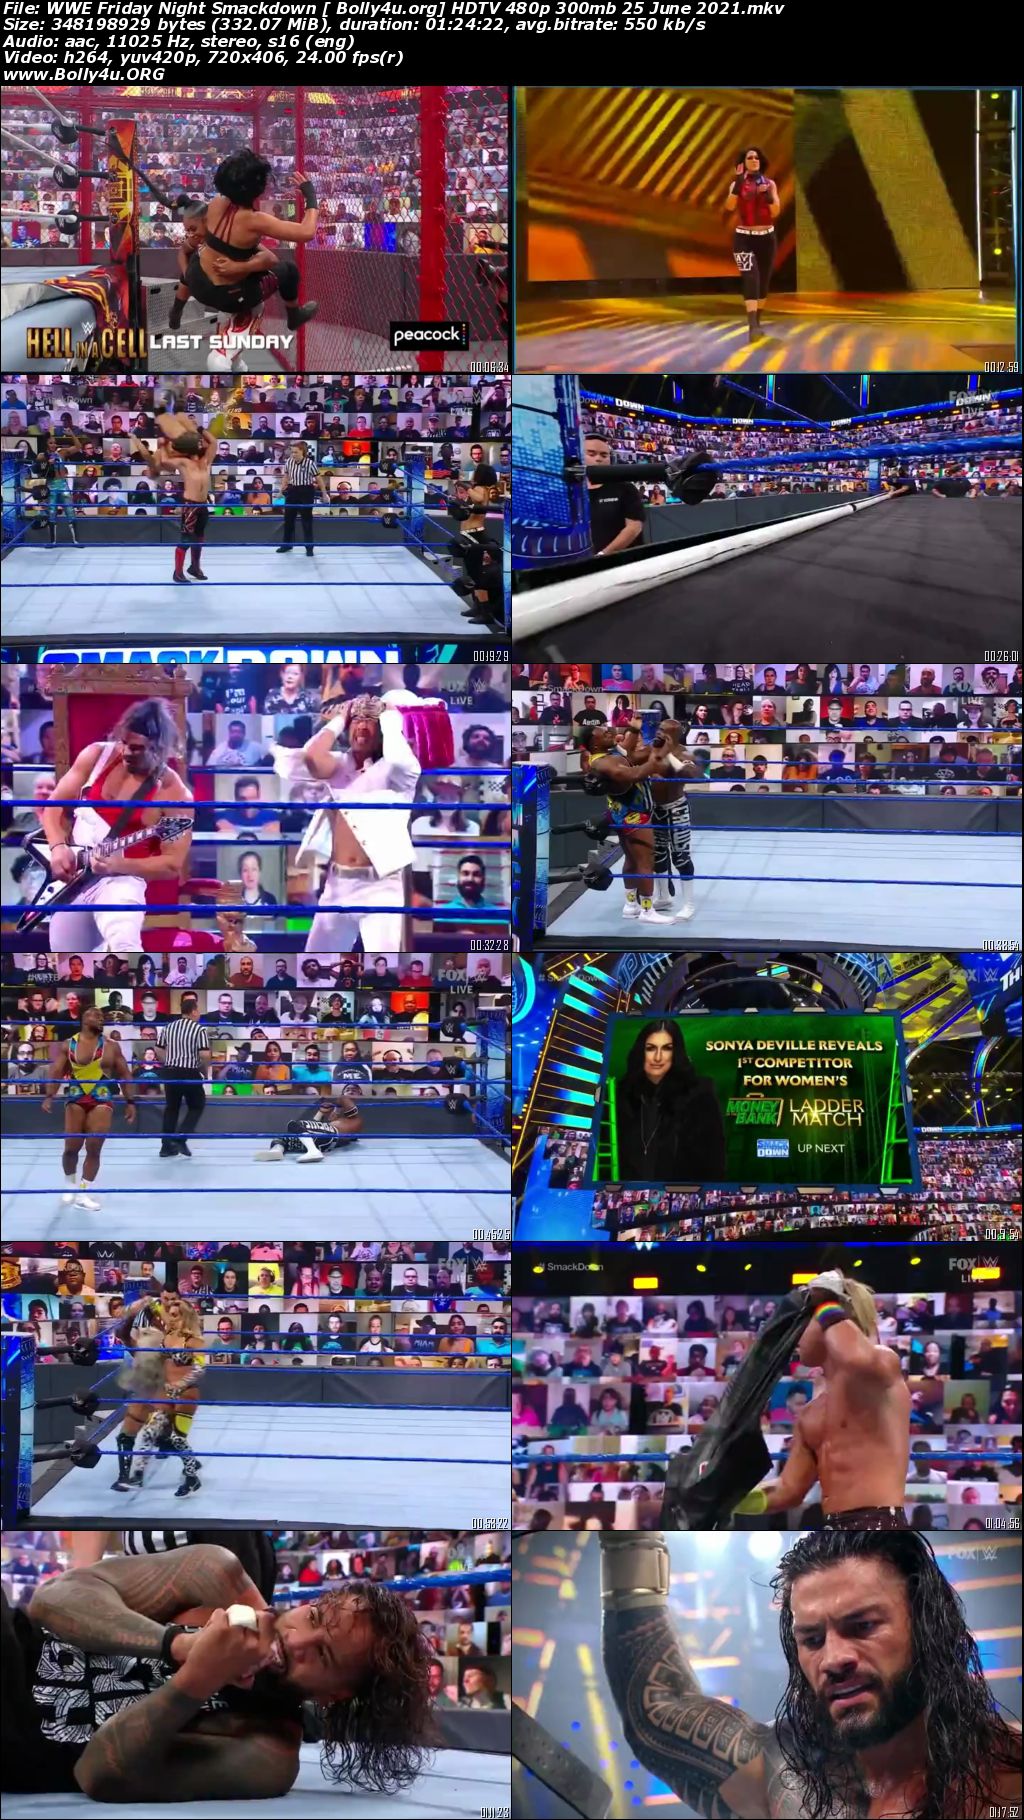 WWE Friday Night Smackdown HDTV 480p 300mb 25 June 2021 Download